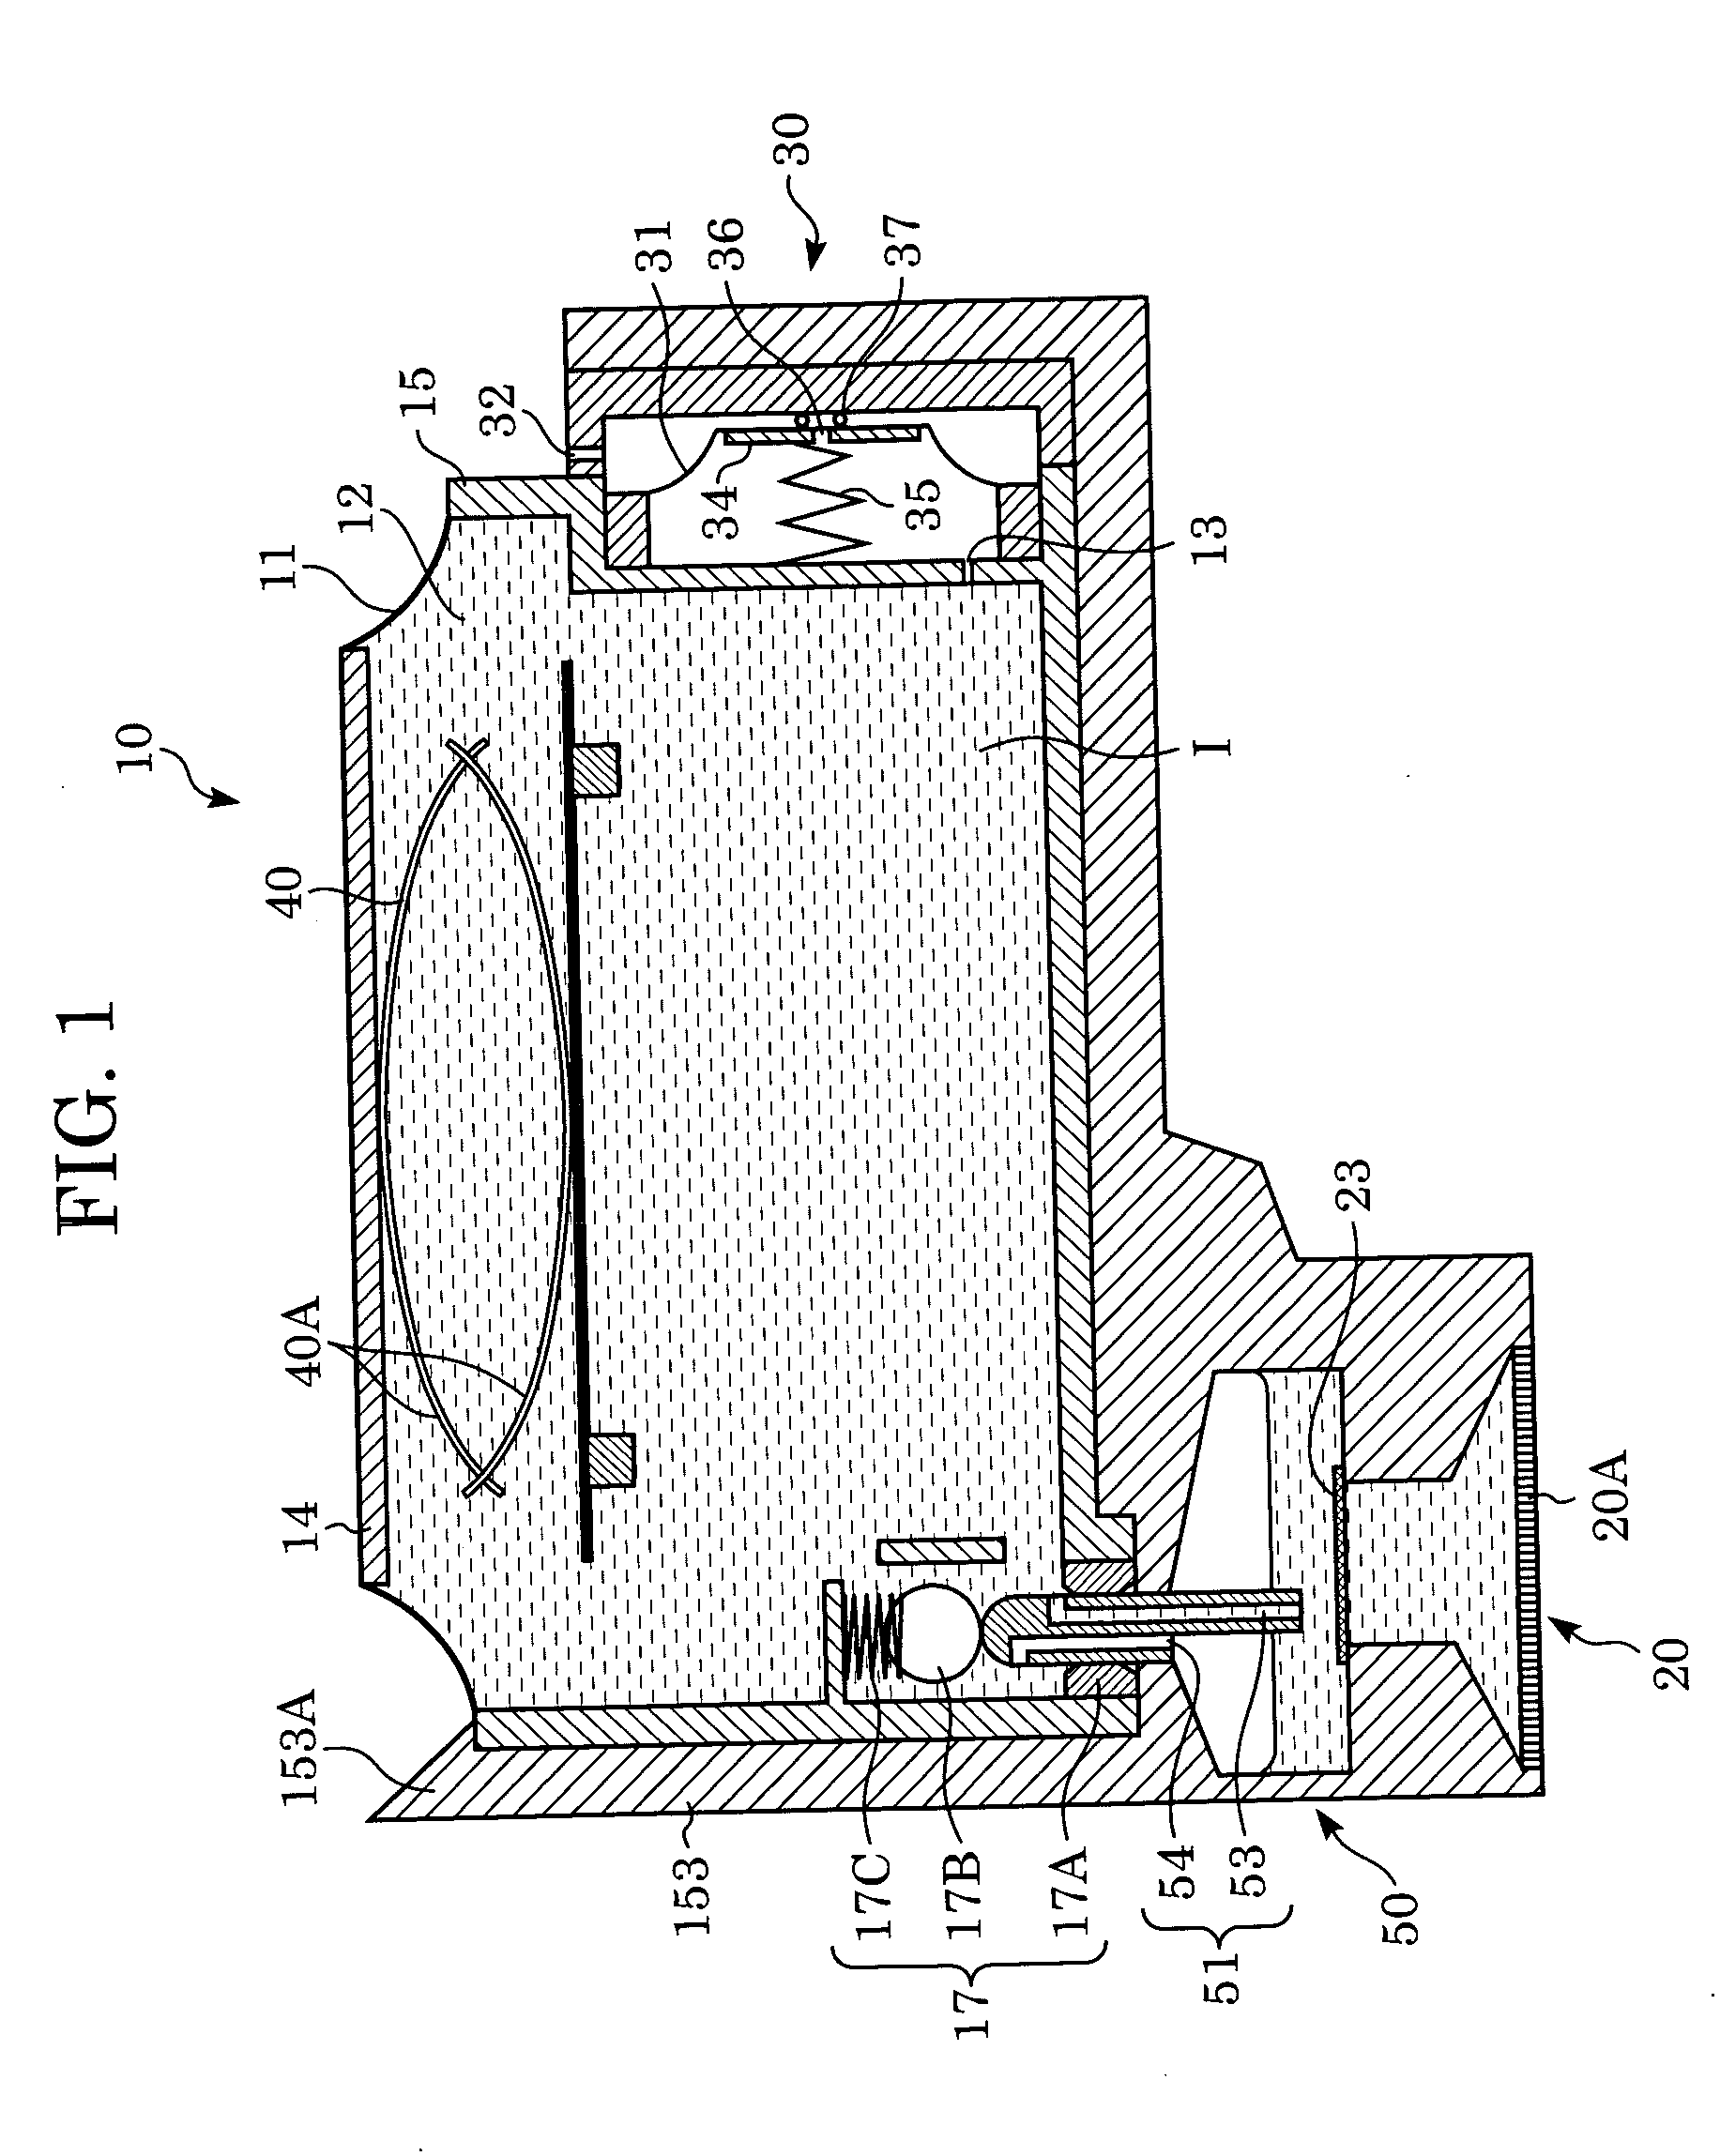 Liquid supply system and apparatus incorporating the same